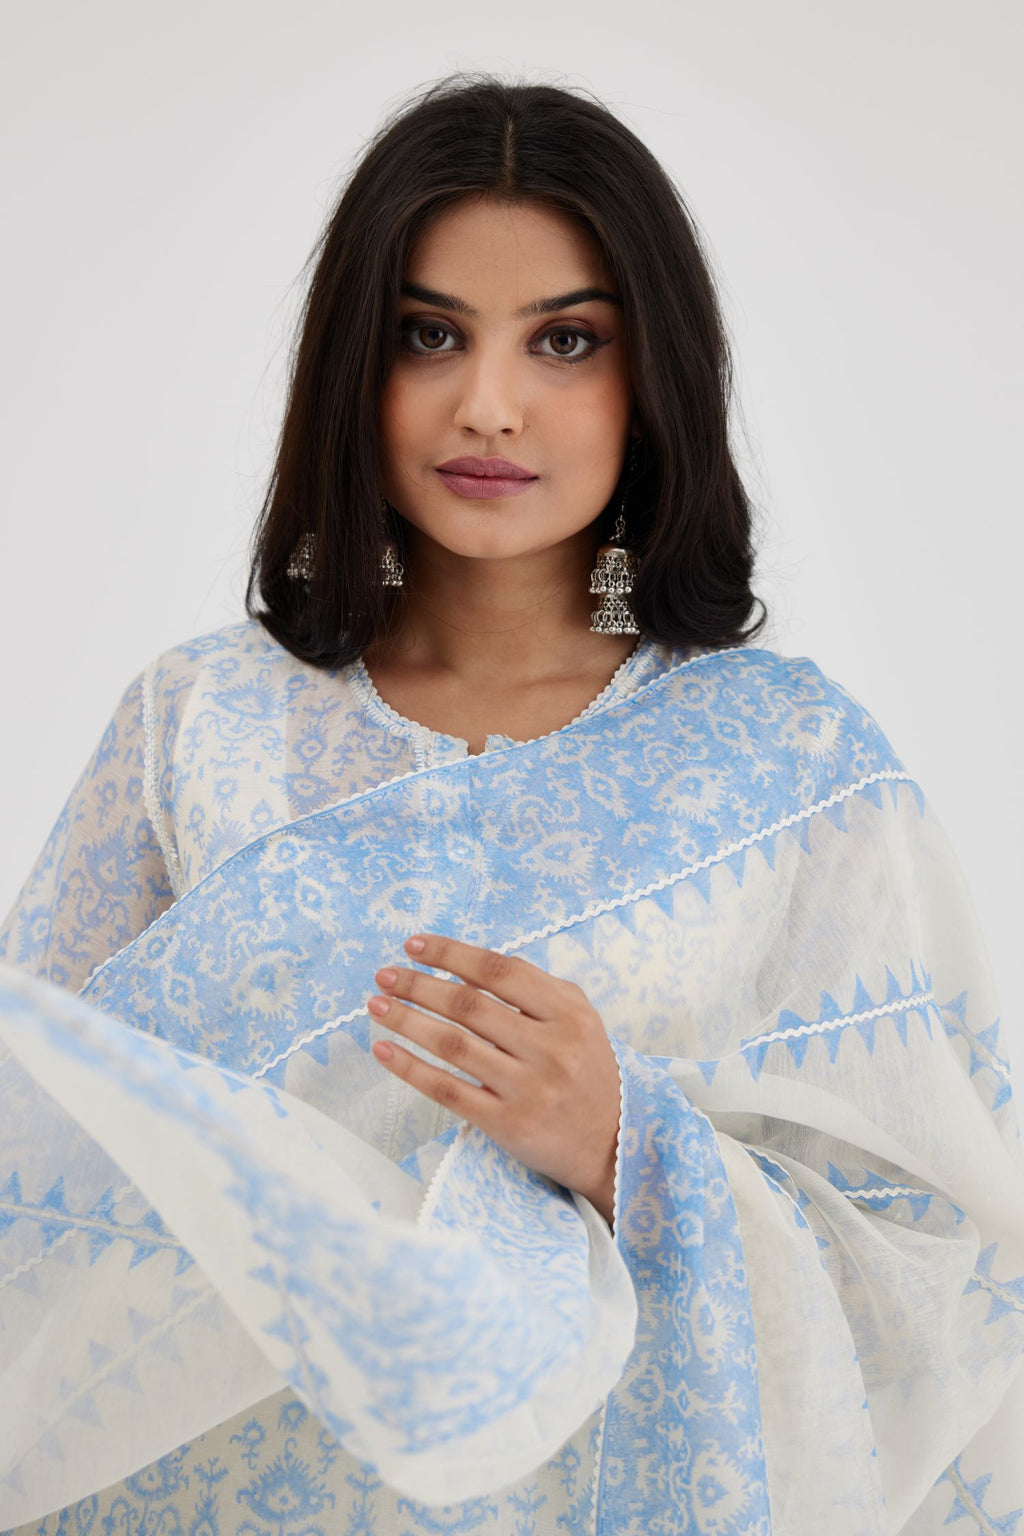 Ikat design blue and off white hand block-printed Cotton Chanderi straight long kurta set with round neck and front button placket.